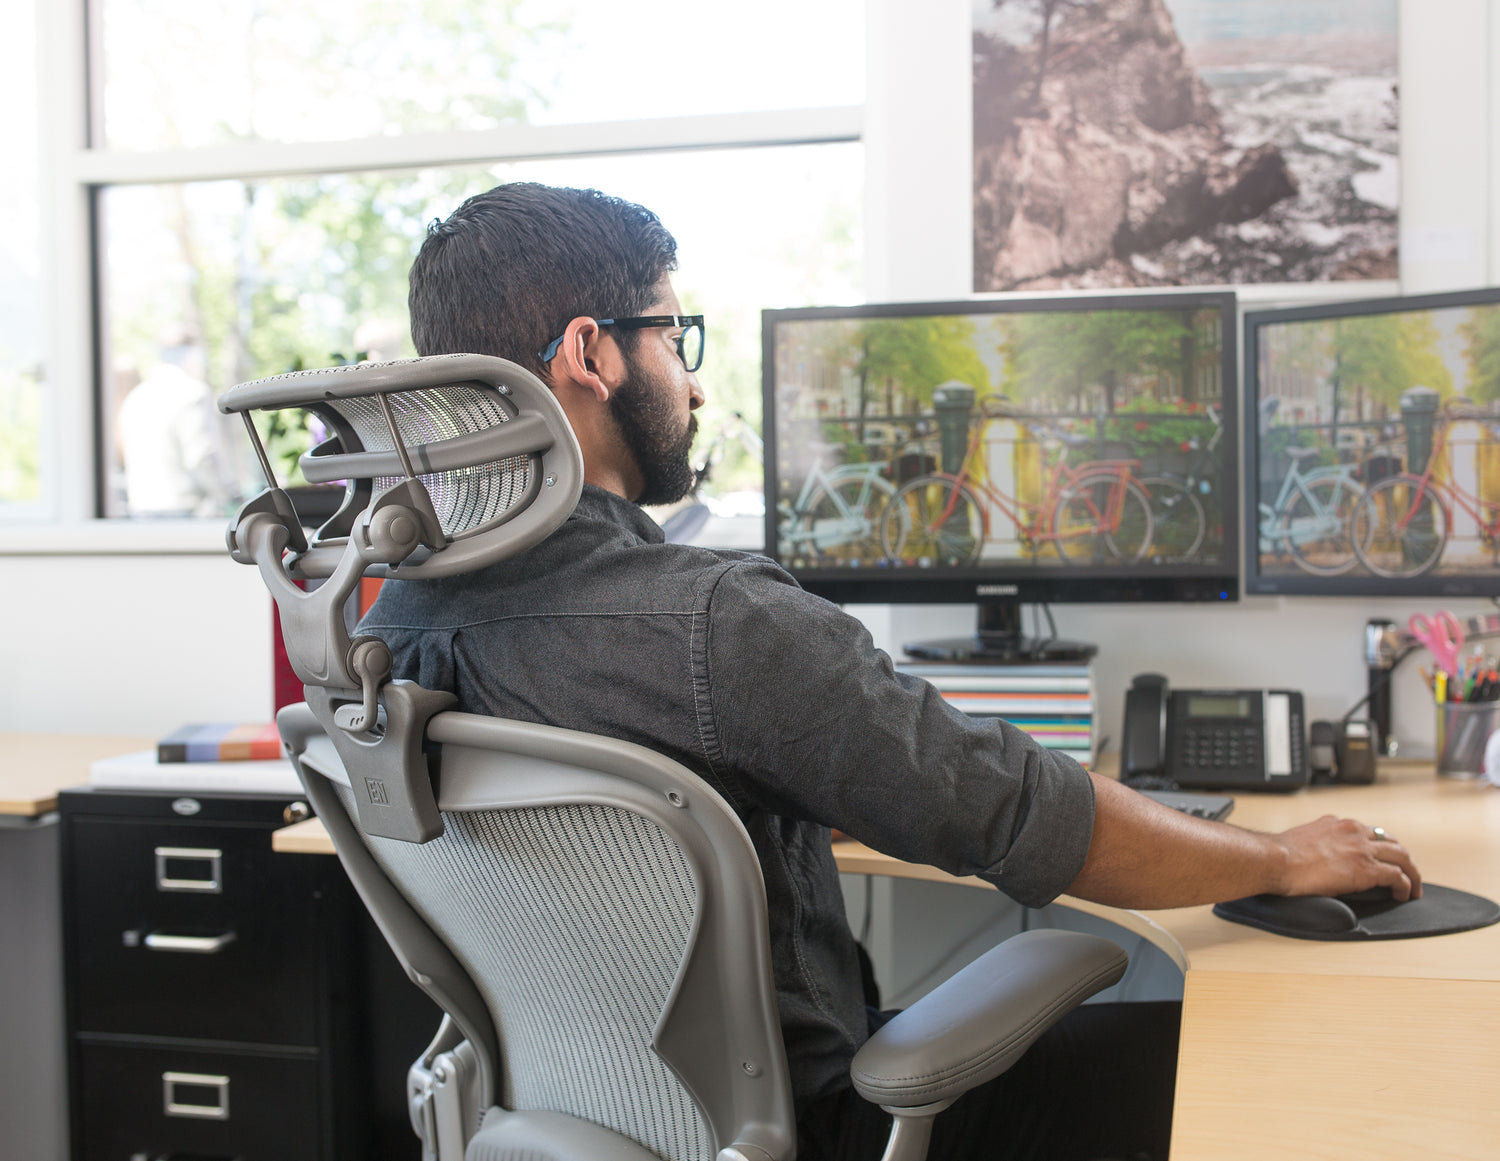 Best Neck Support For Office Chair: Use A Headrest Or Not?